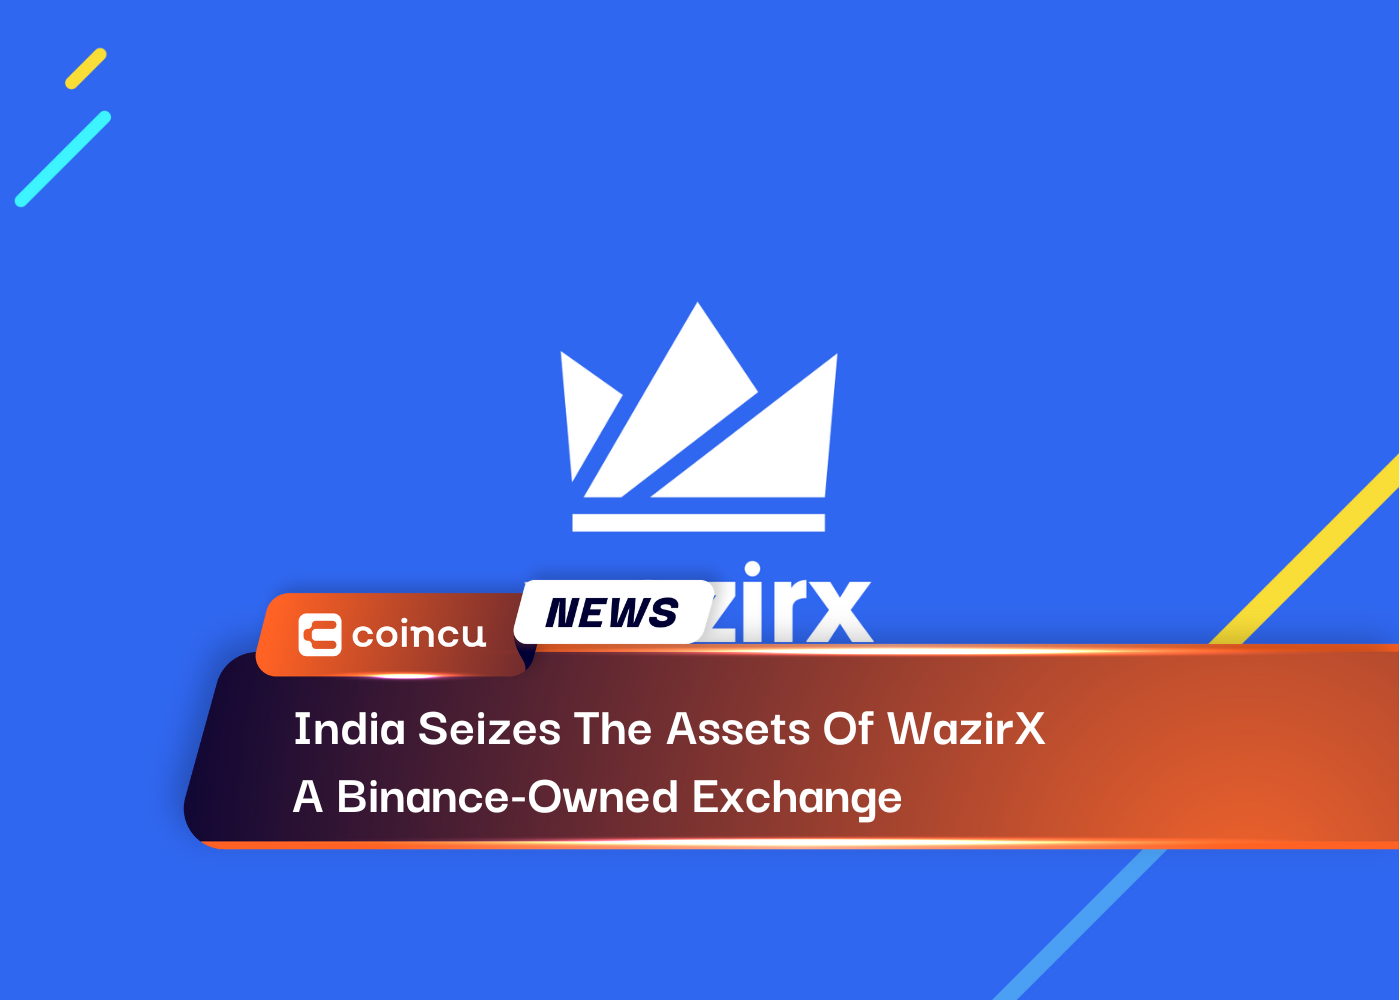 India Seizes The Assets Of WazirX